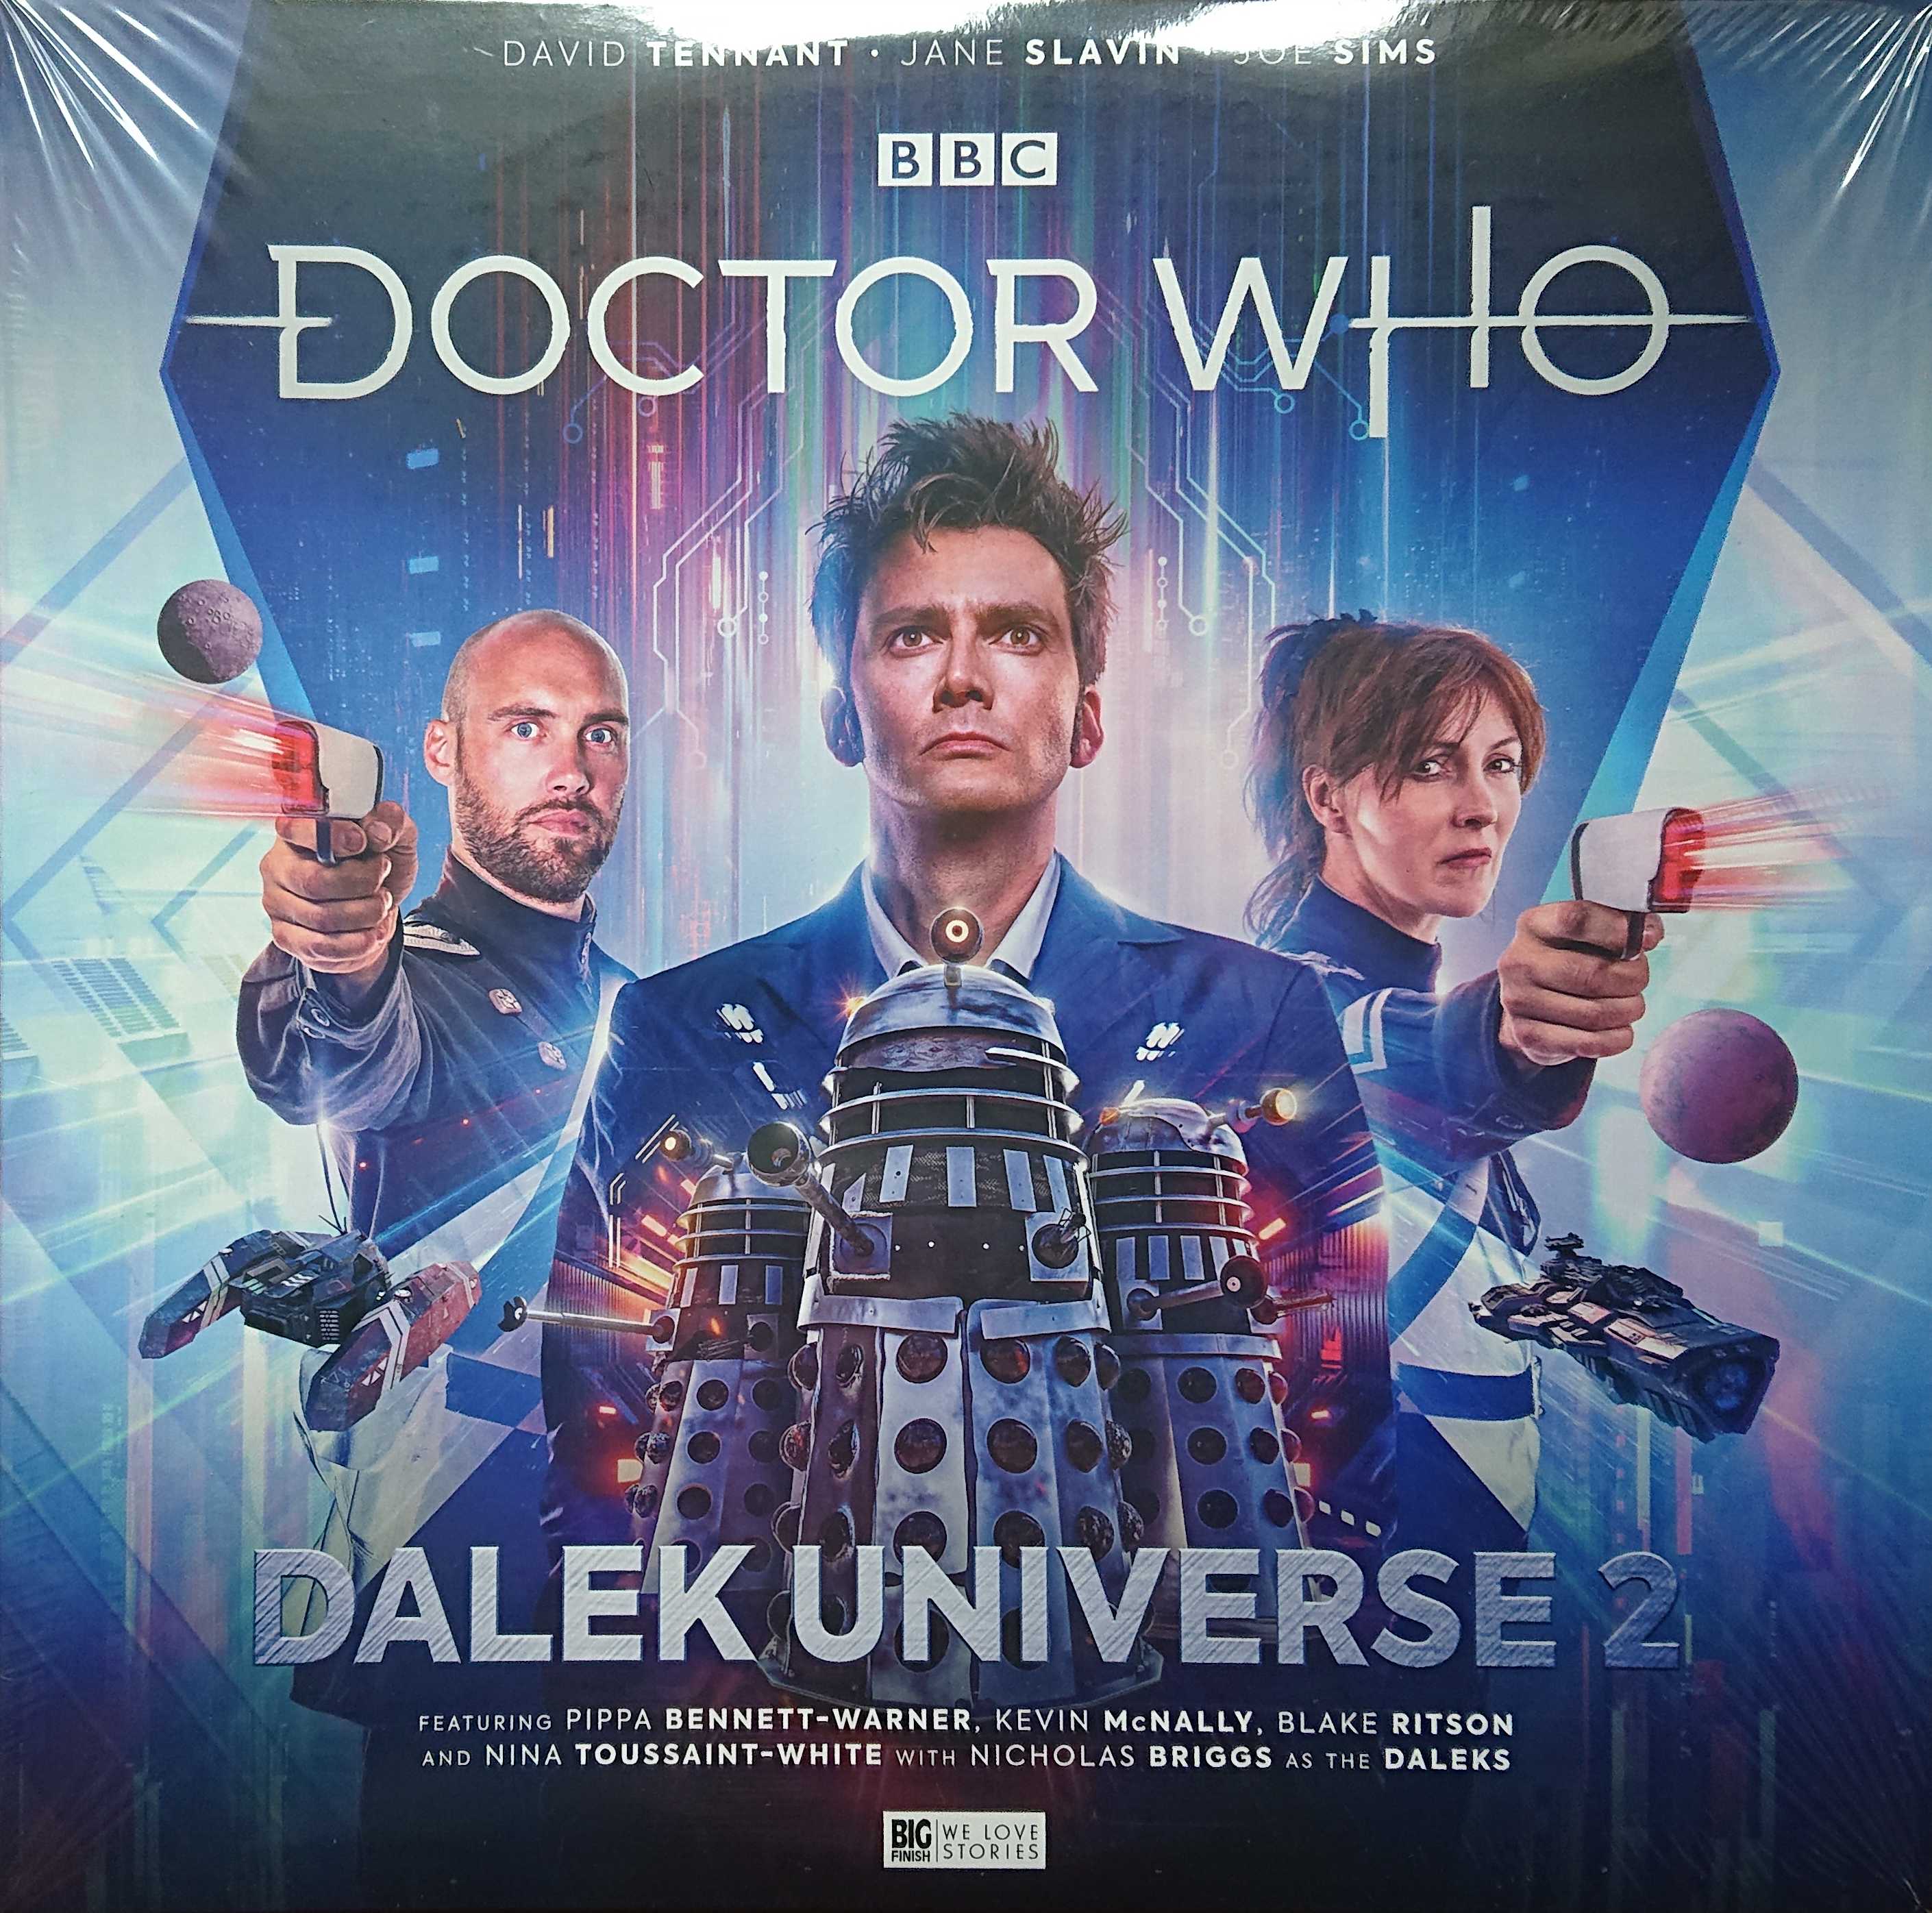 Picture of BFPDW10THDALEKU2V Doctor Who - Dalek Universe 2 by artist Roy Gill / John Dorney / Robert Valentine from the BBC records and Tapes library